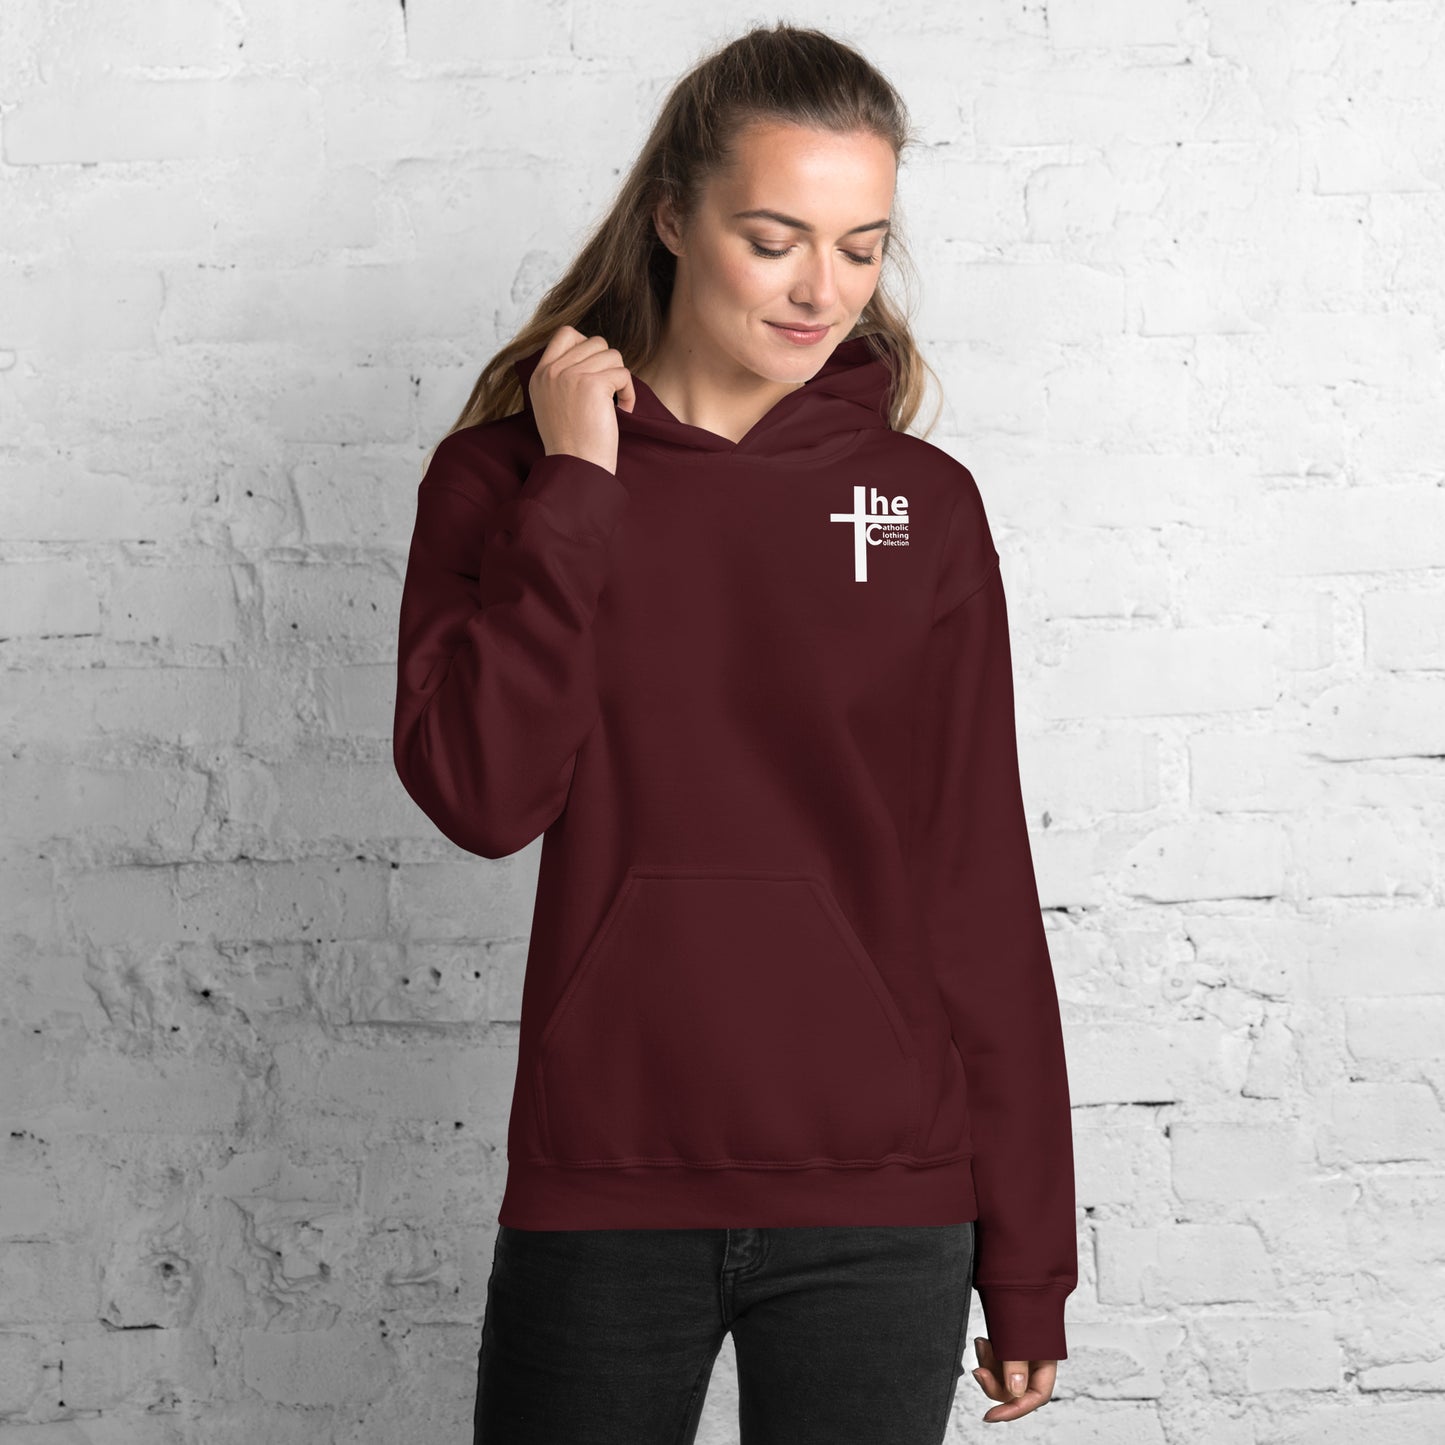 I came, I saw, God Conquered Women's Hoodie